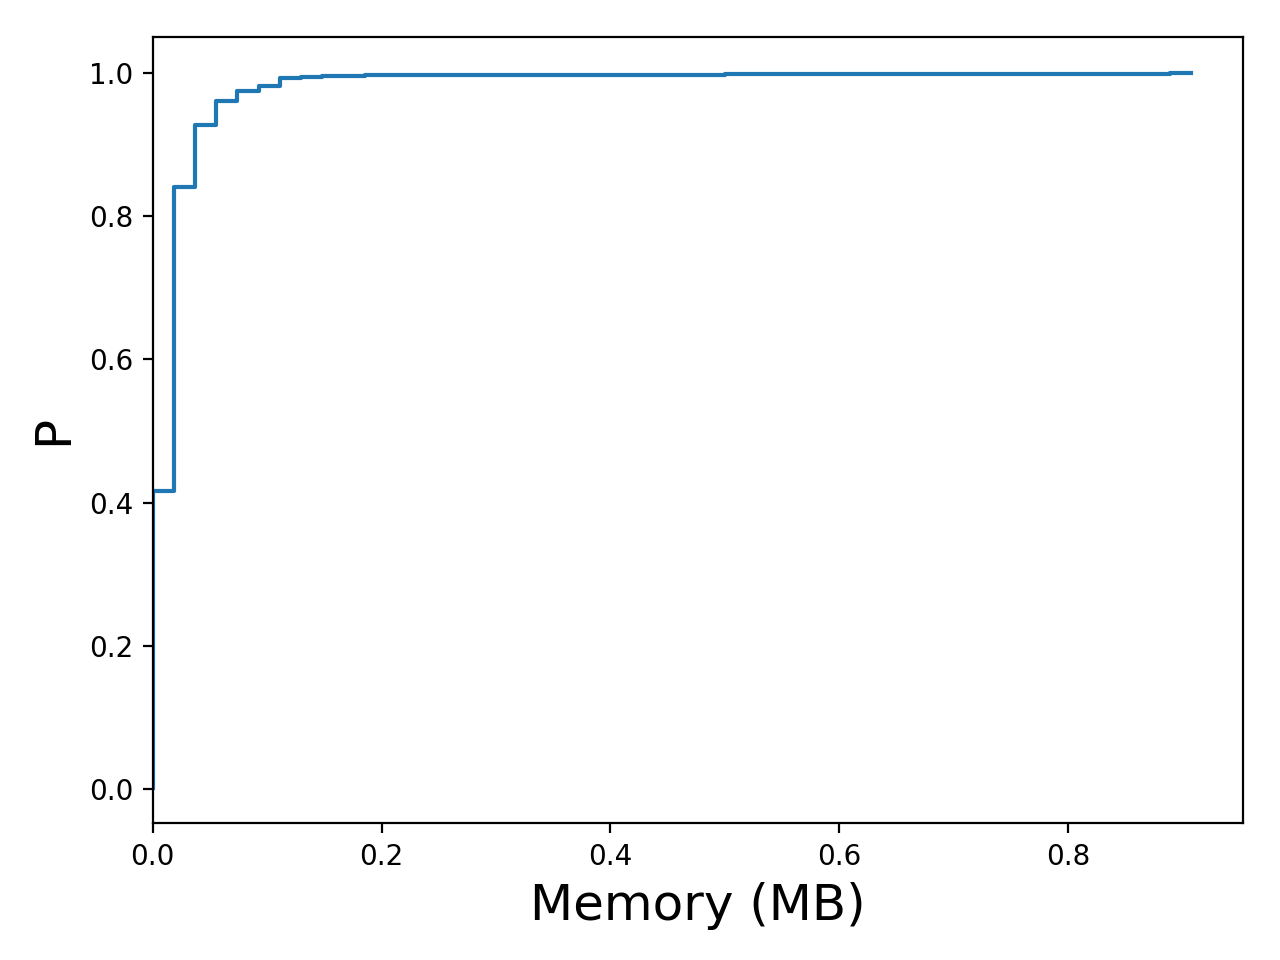 Task memory consumption graph for the Google trace.